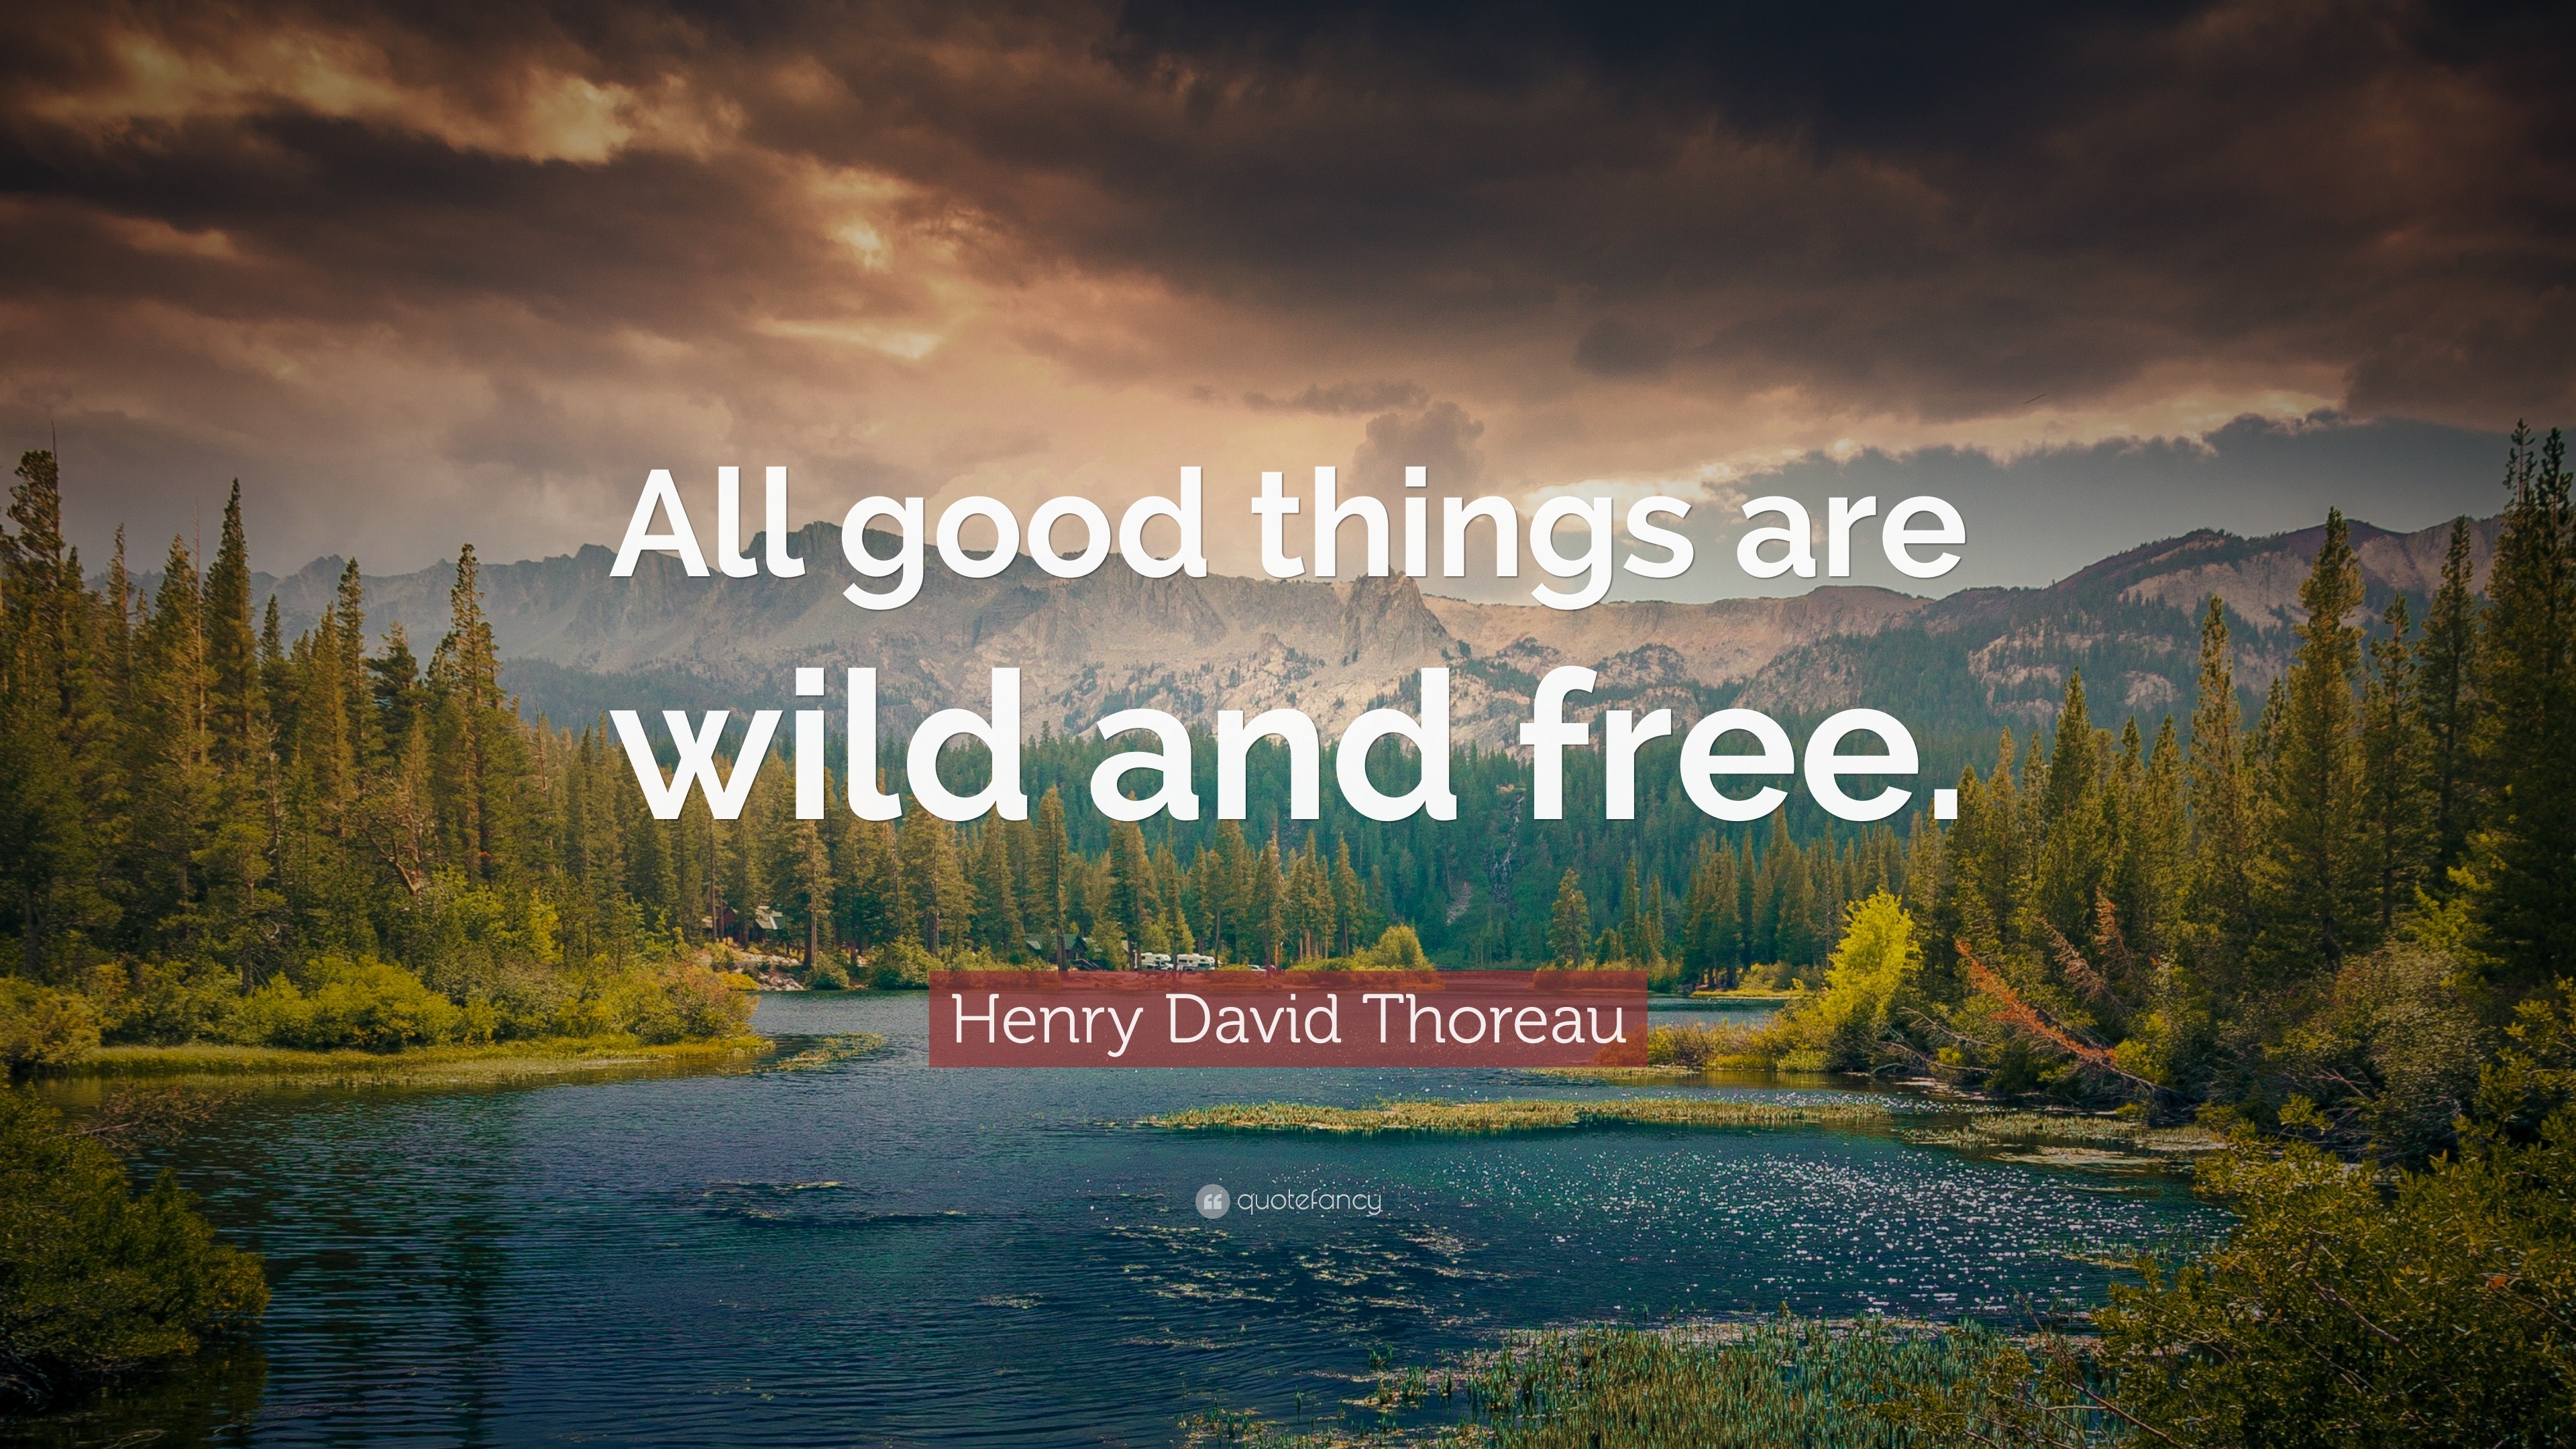 https://quotefancy.com/media/wallpaper/3840x2160/24786-Henry-David-Thoreau-Quote-All-good-things-are-wild-and-free.jpg